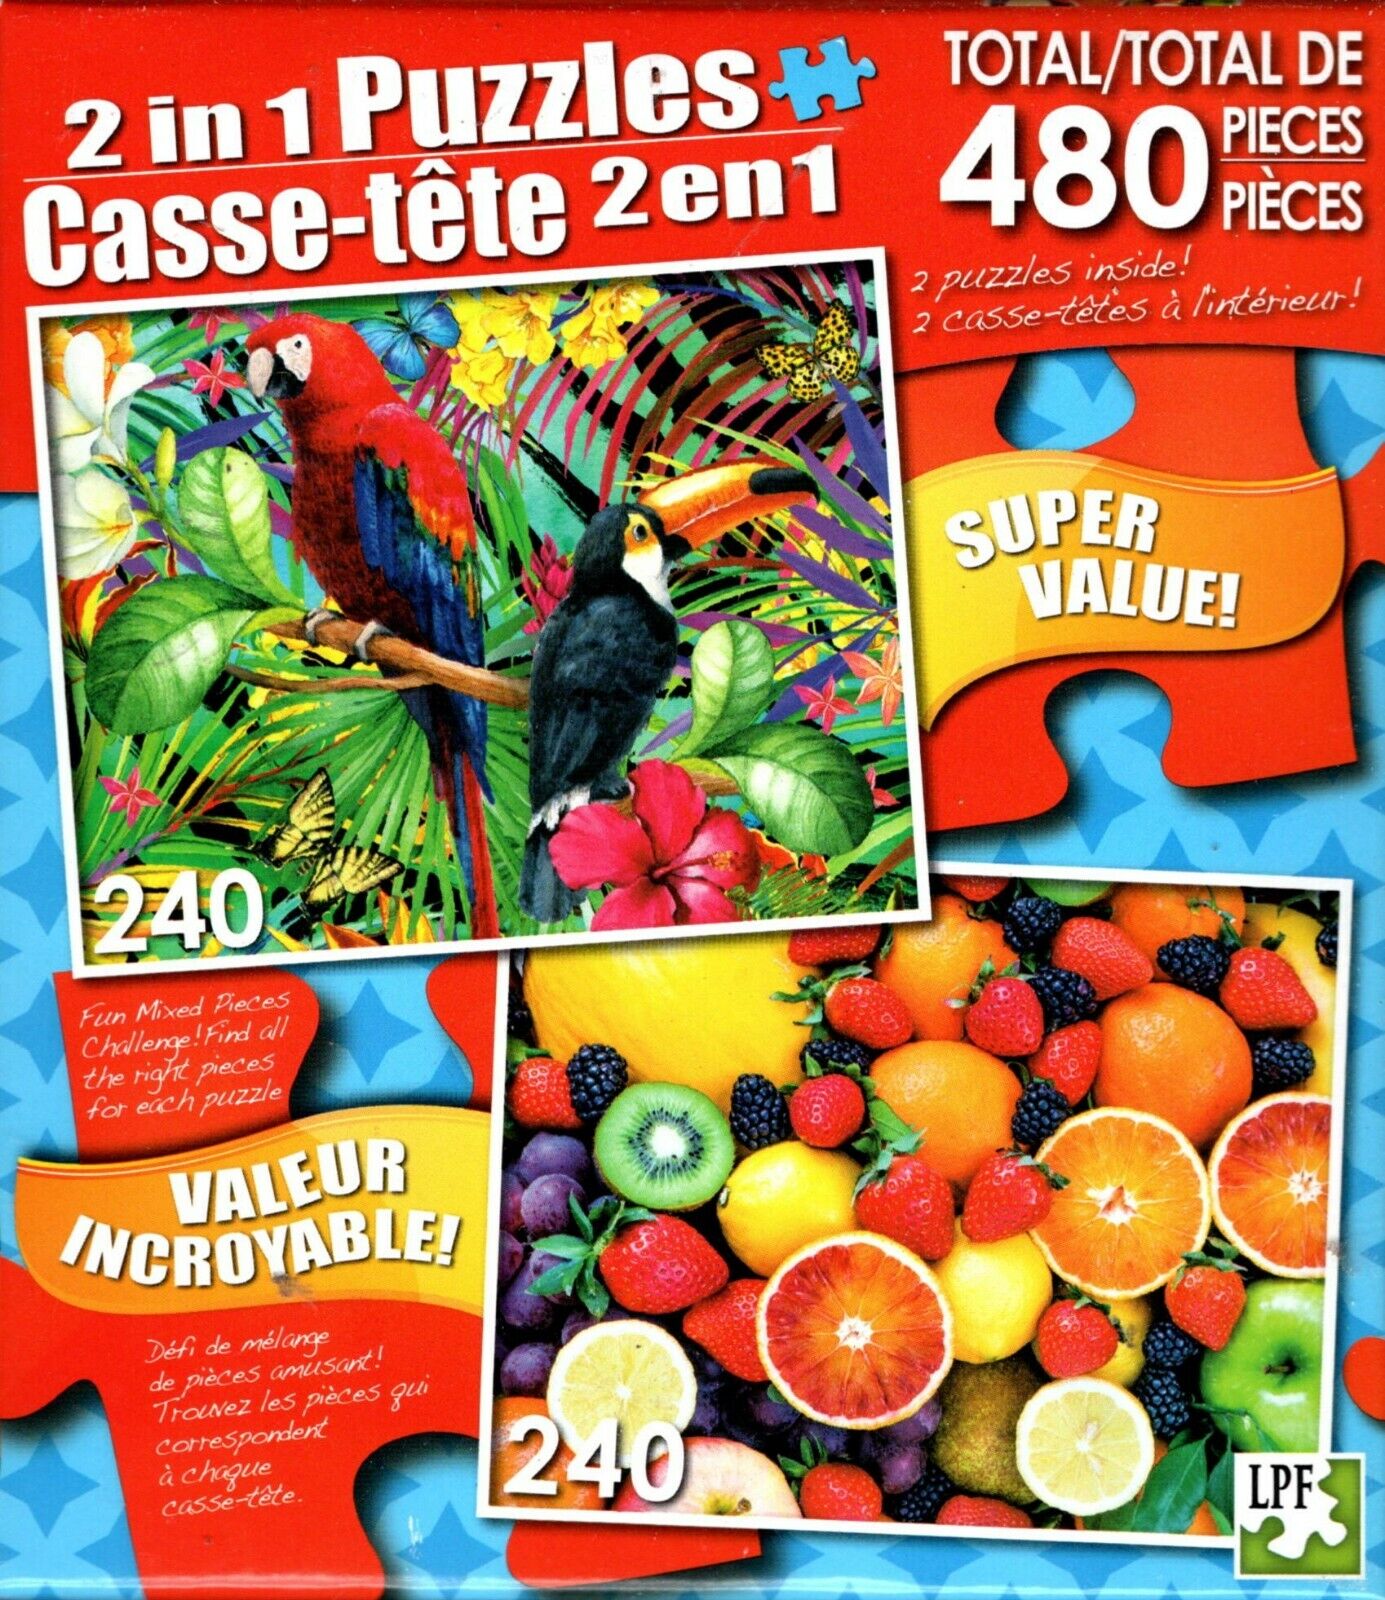 Tropical Birds / Variety of Colorful Fruit - Total 480 Piece 2 in 1 Puzzles